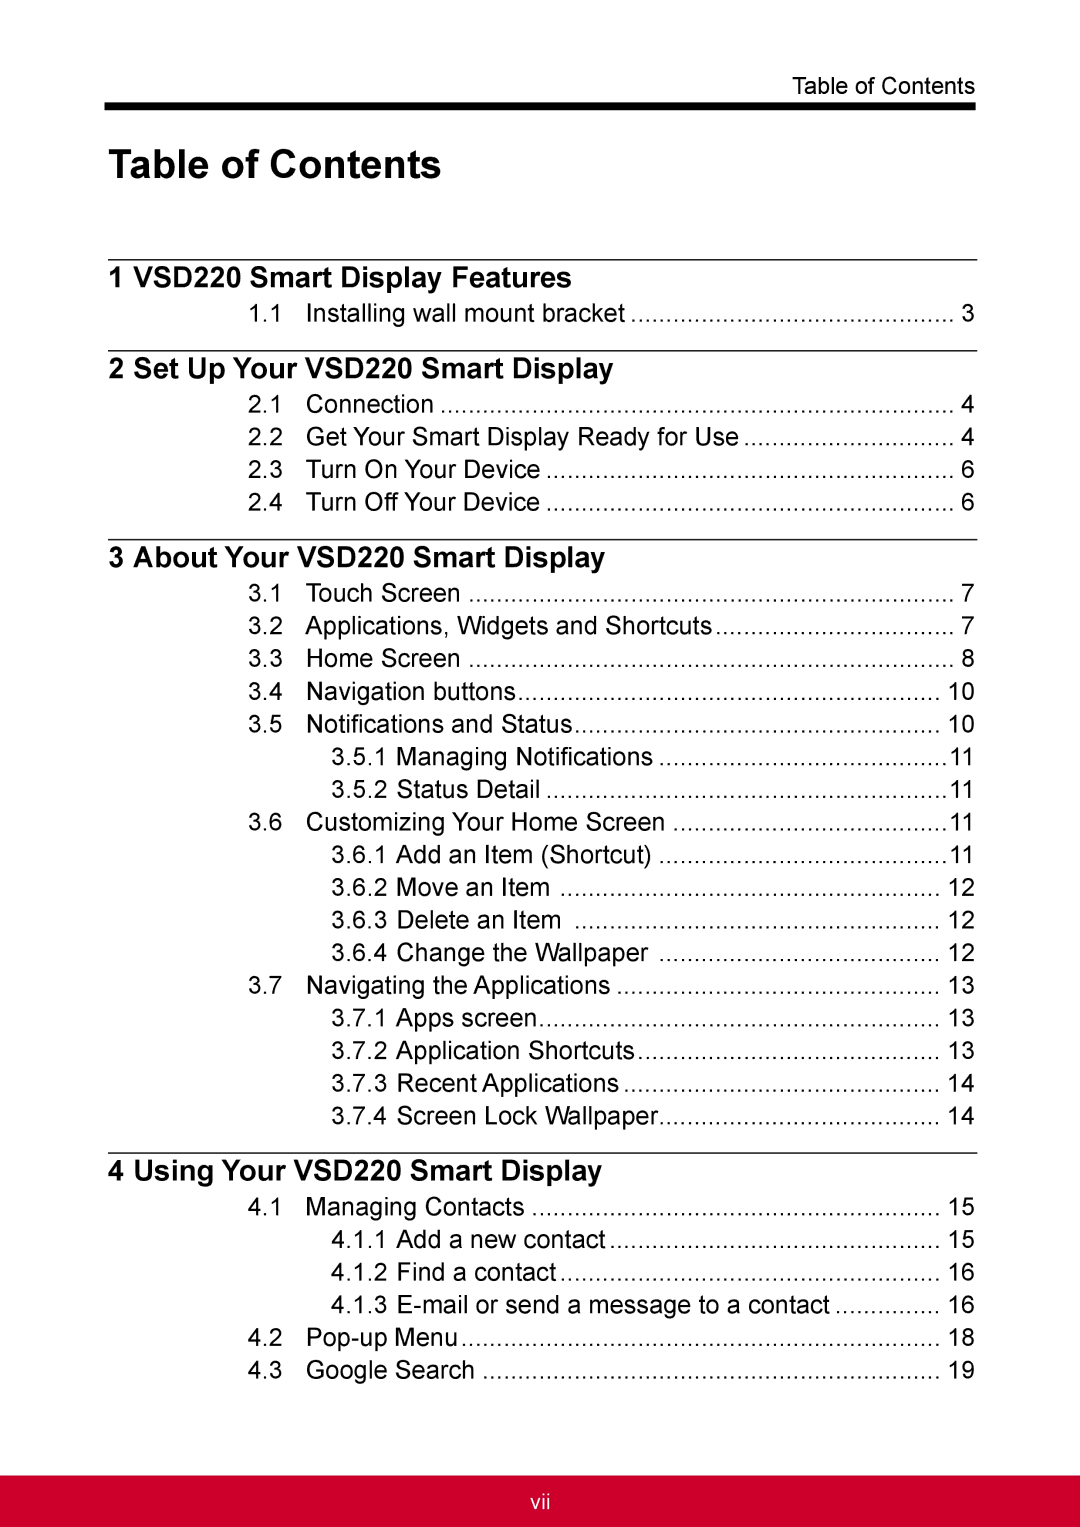 ViewSonic VSD220 manual Table of Contents 